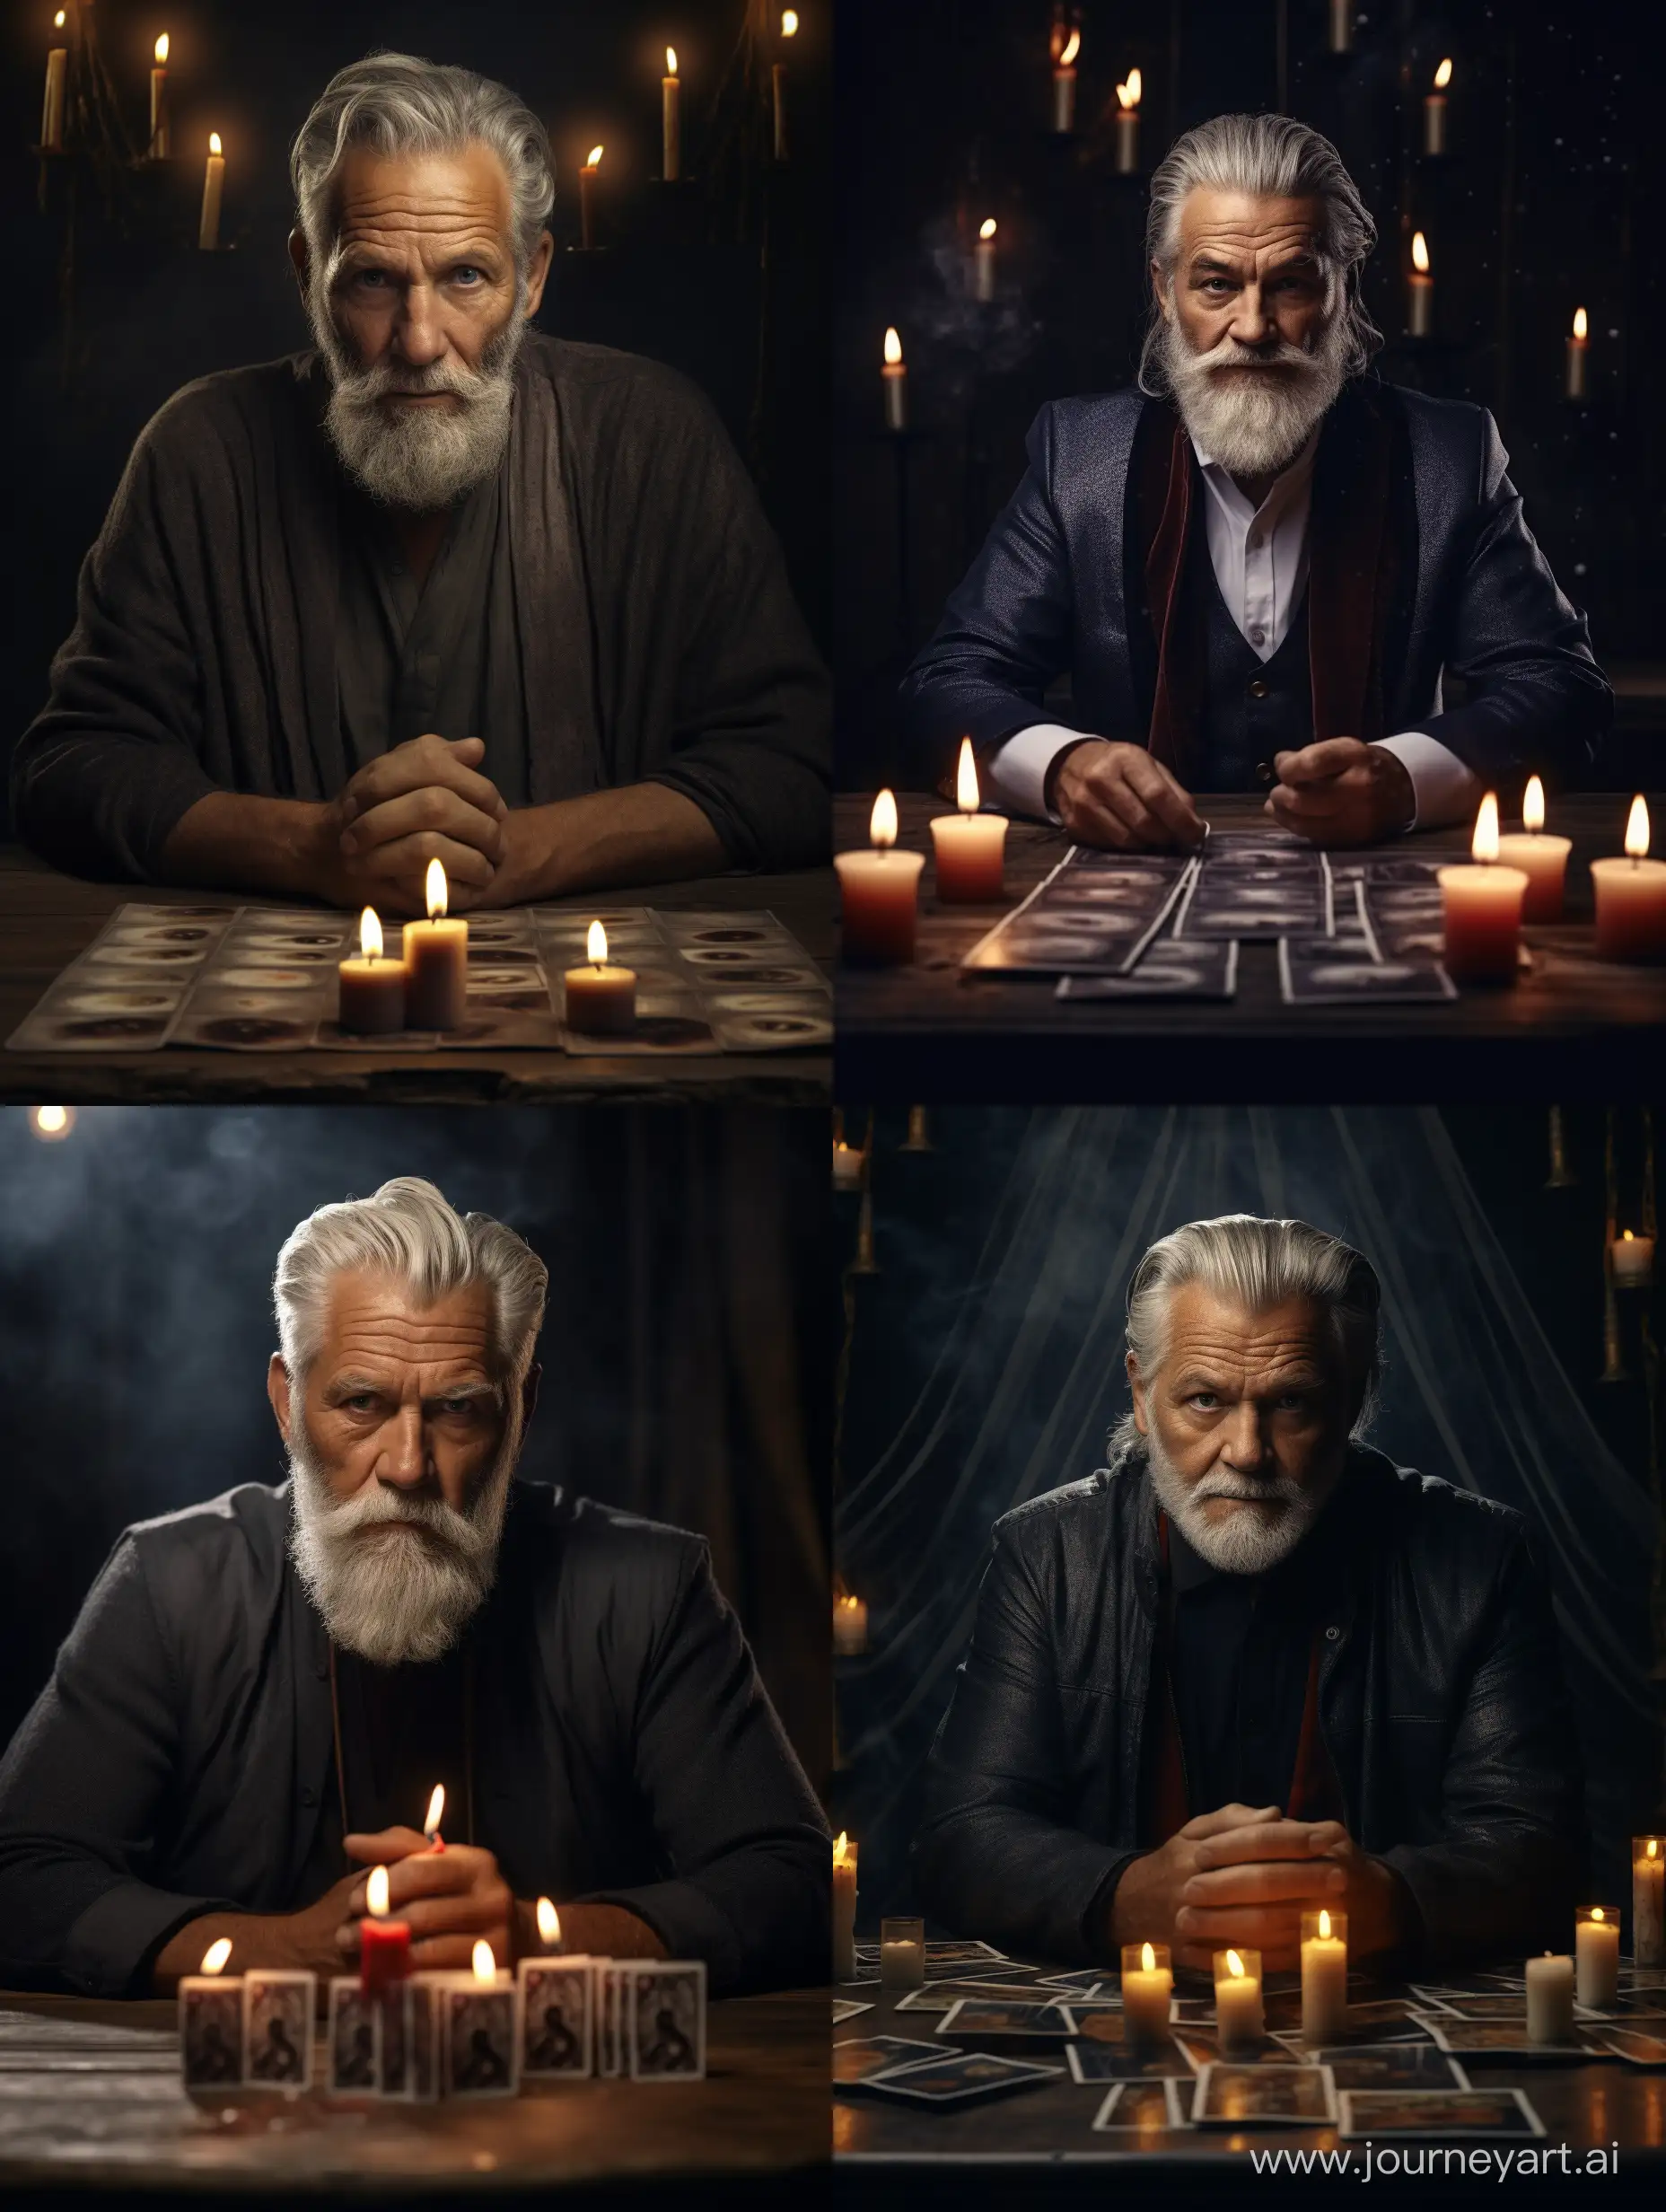 Wise-80YearOld-Tarot-Reader-Engages-with-Mystic-Candles